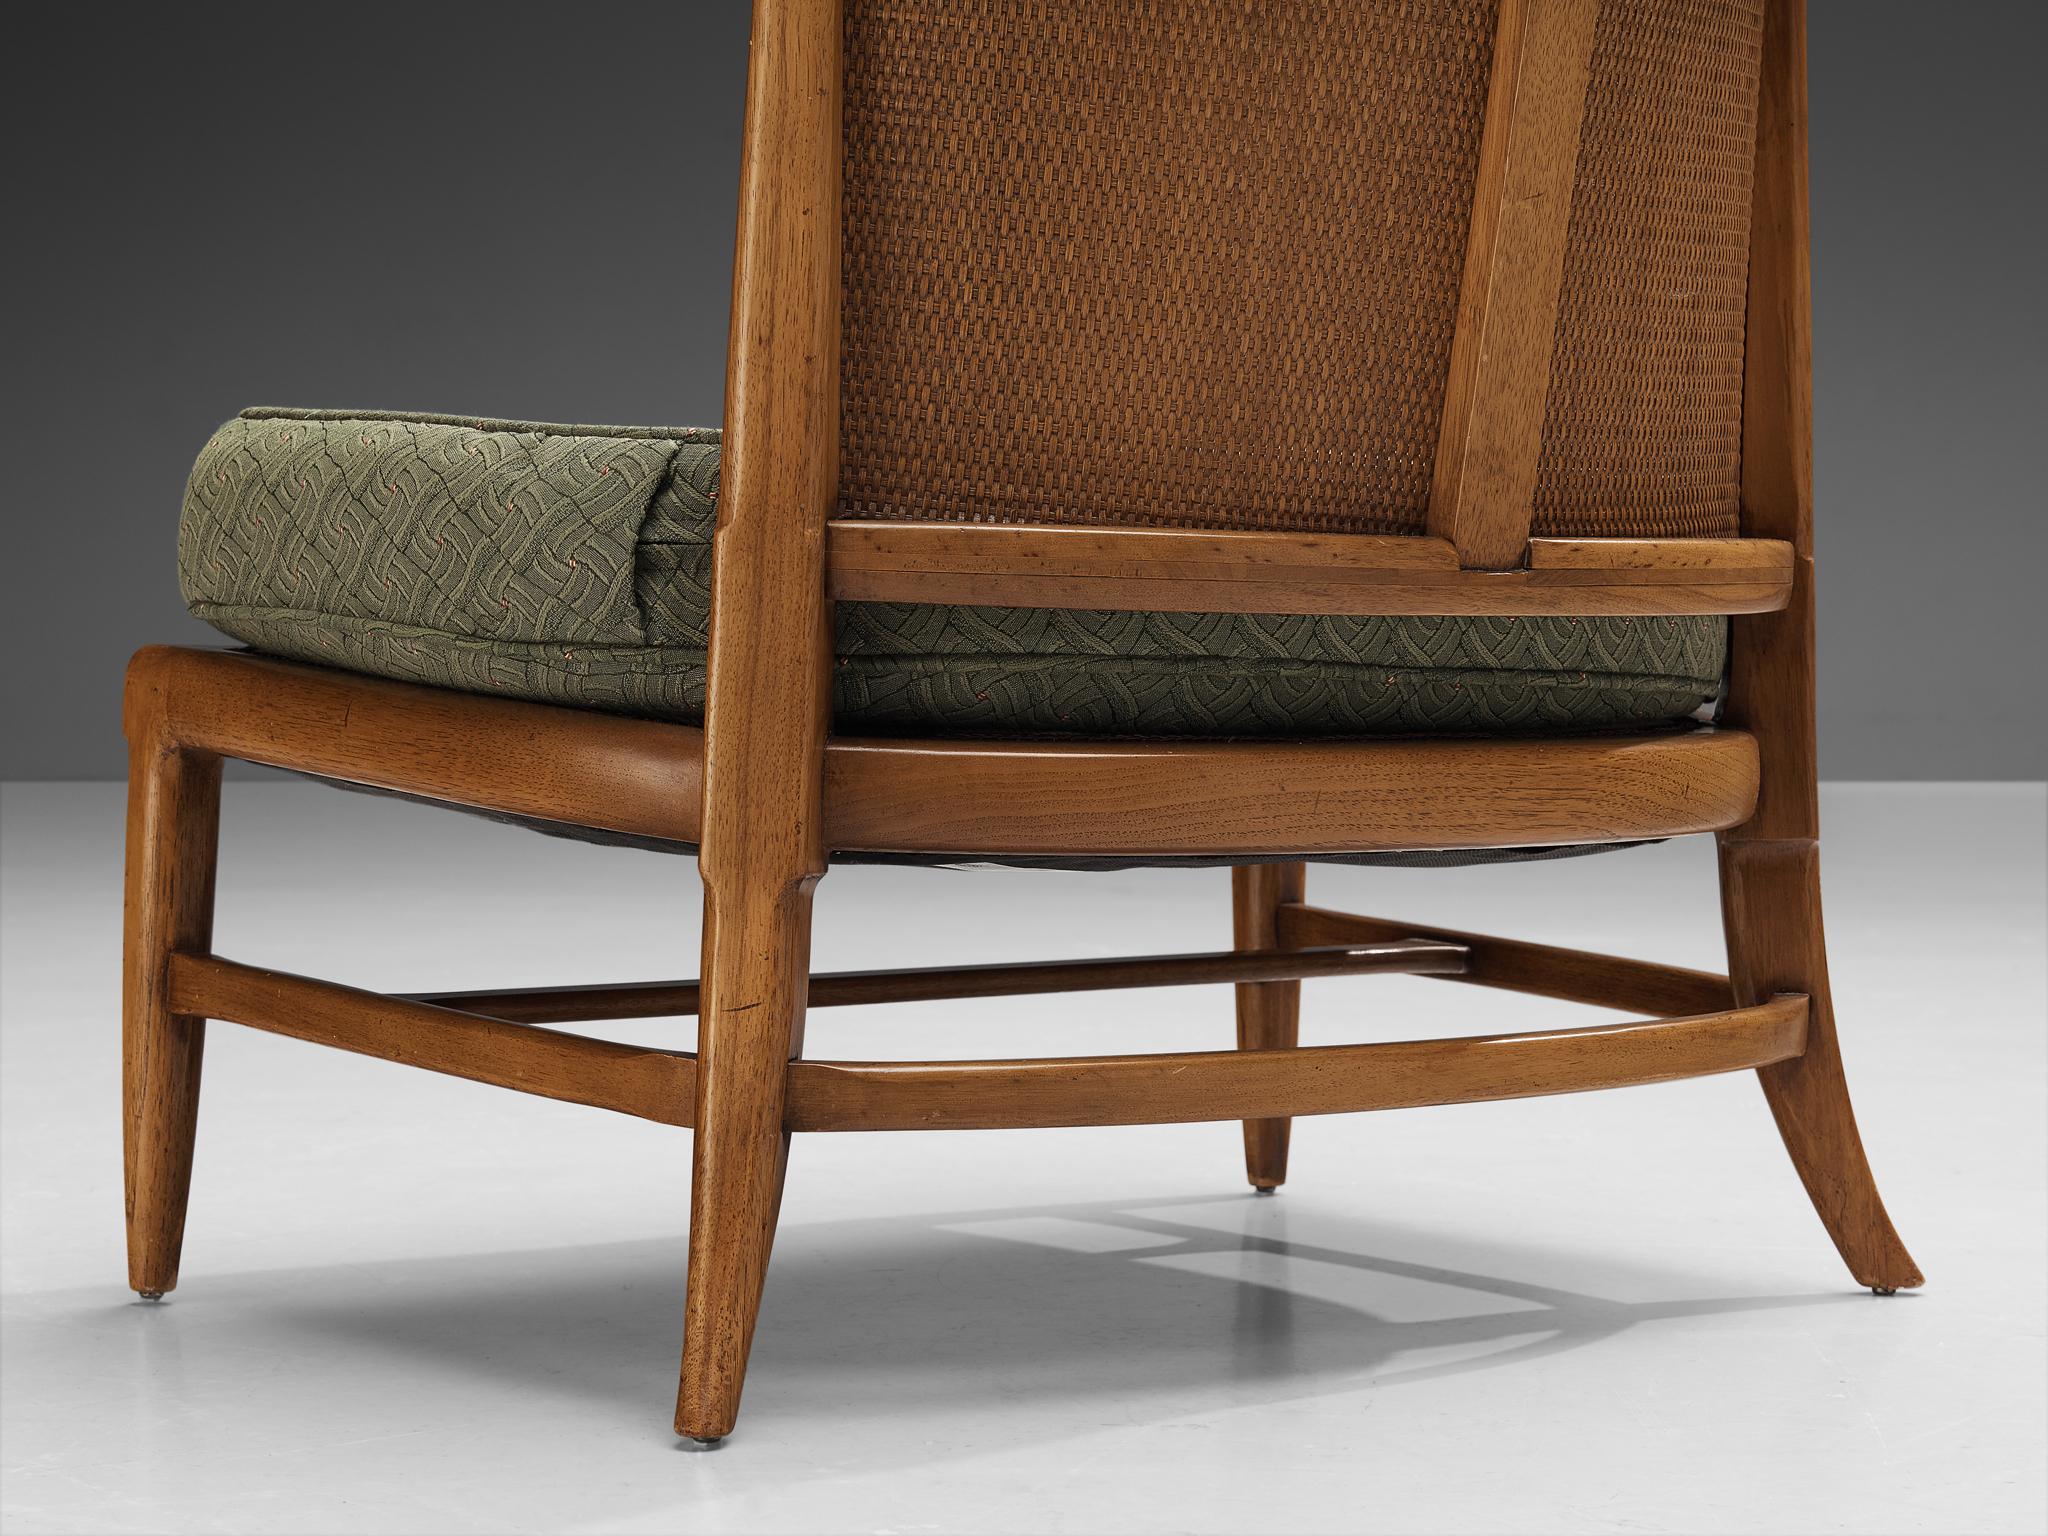 Cane John Lubberts & Lambert Mulder for Tomlinson Pair of Chairs in Walnut